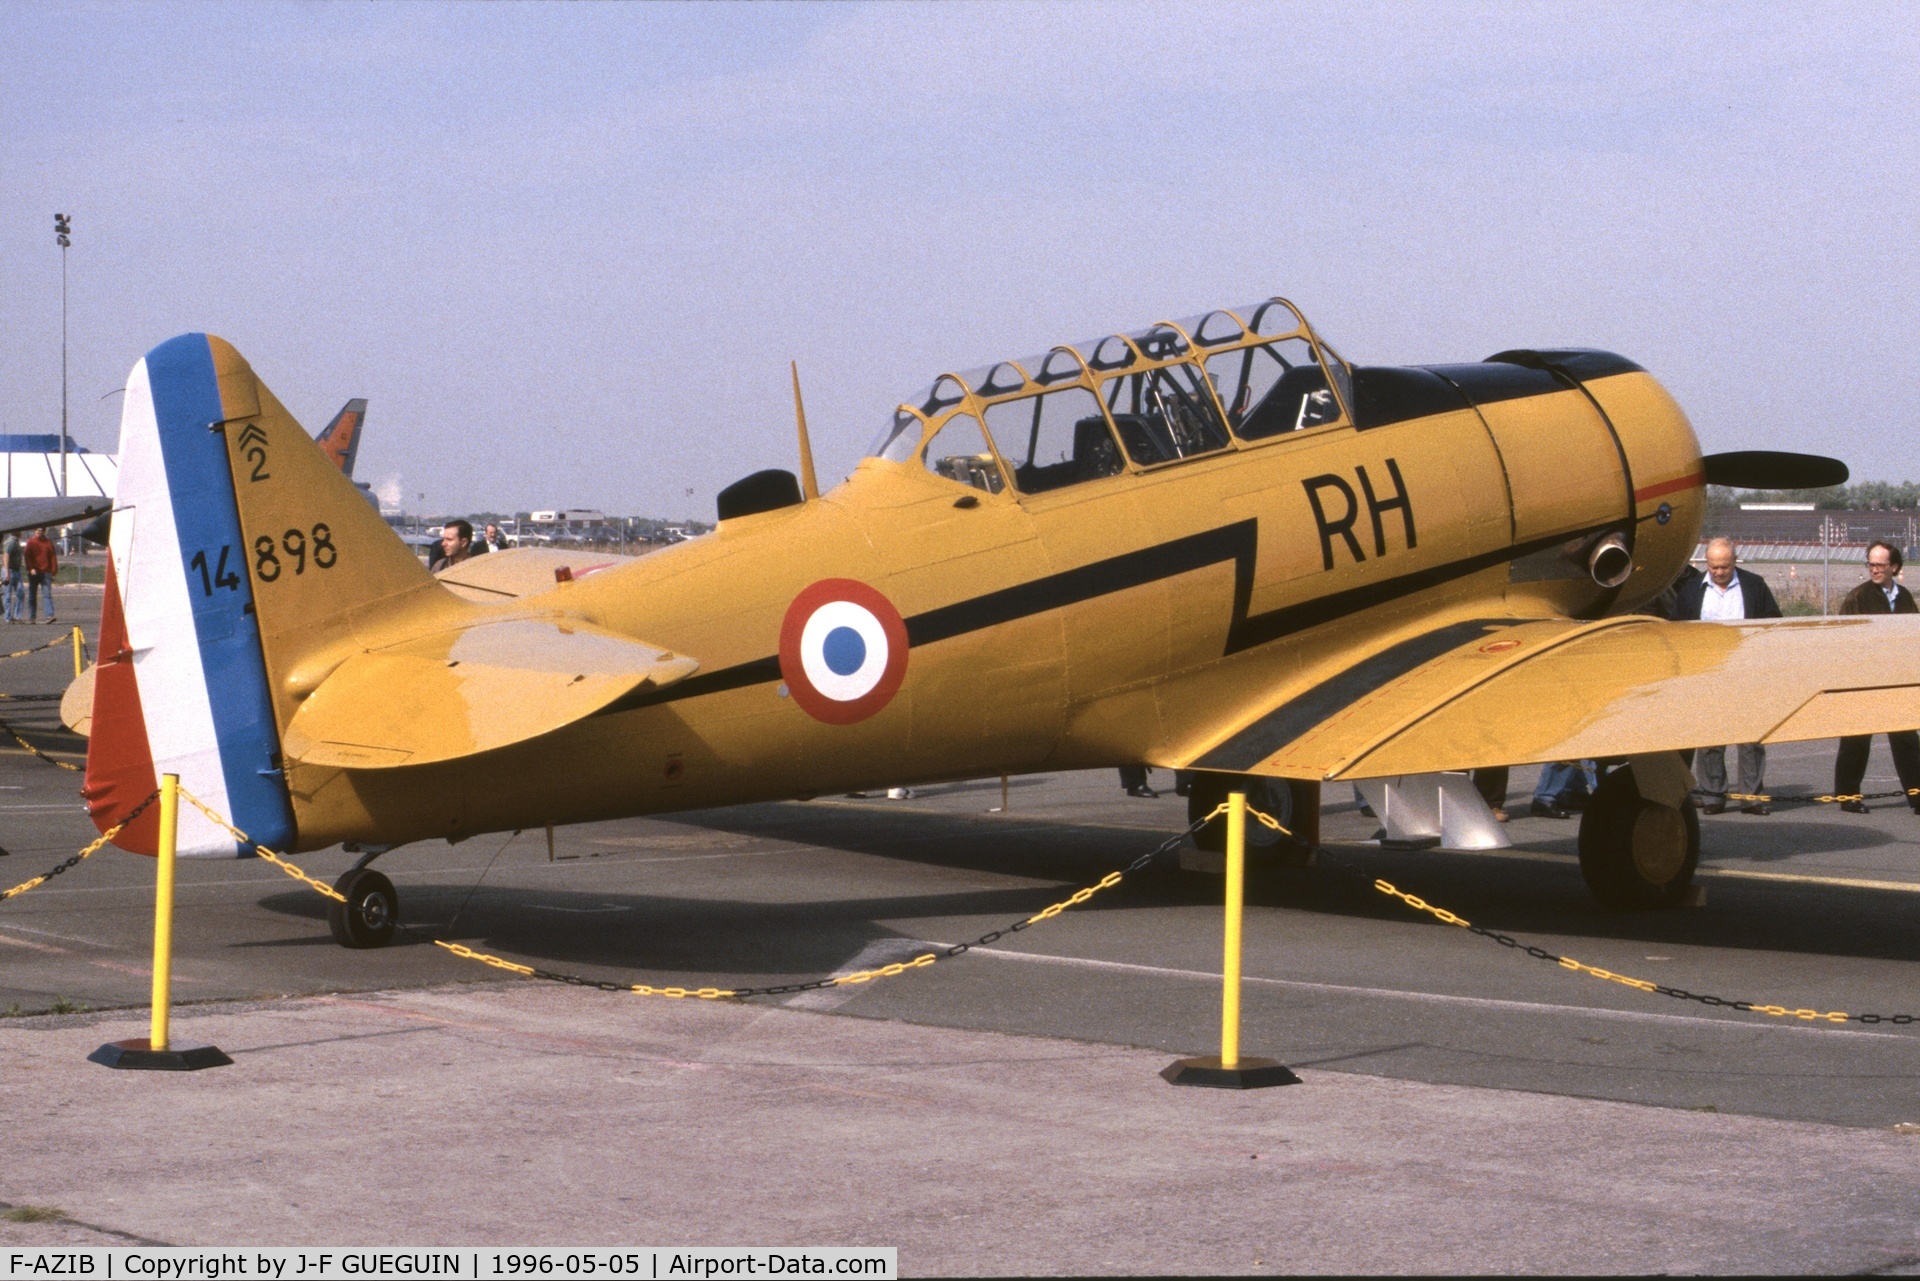 F-AZIB, North American T-6G Texan C/N 182-585, On display at Paris-Le Bourget Airport (Salon des Avions de Légende, 1996) (ex-AT-6D-NT c/n 88-17018, serial 42-85237 rebuilt to standard T-6G with c/n 182-585 and serial 51-14898).